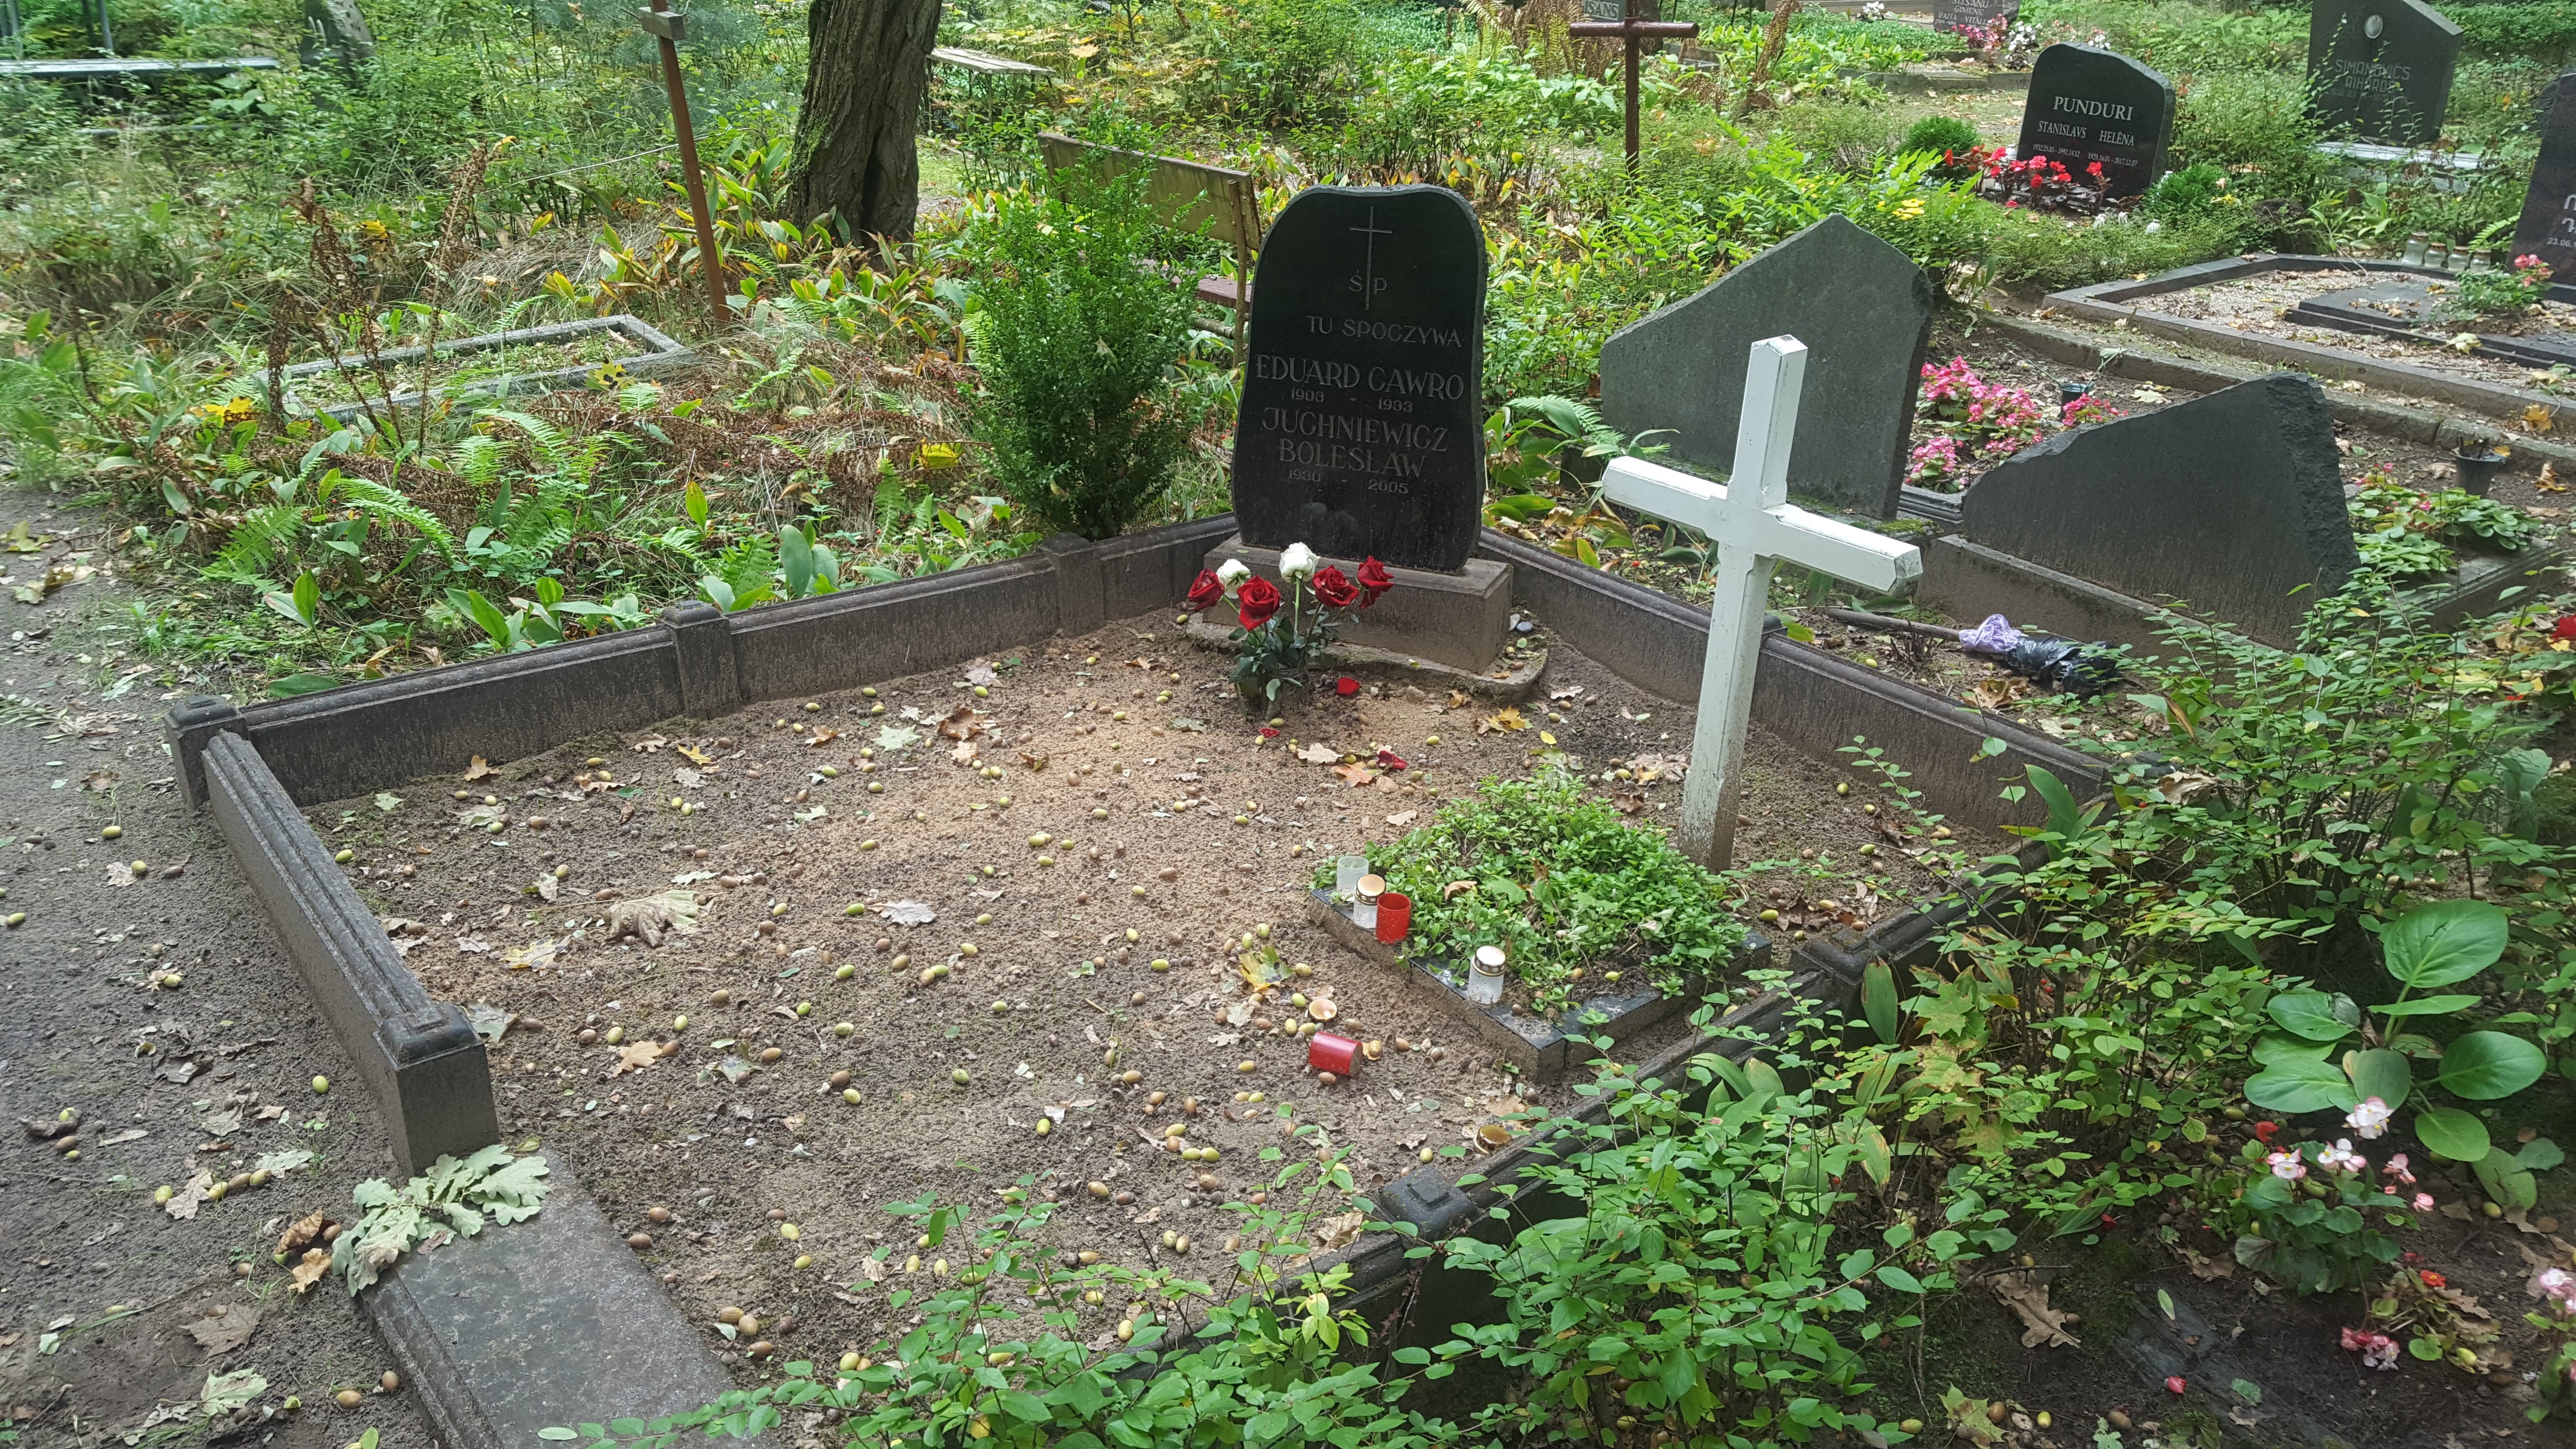 Tombstone of Eduard Gawro and Boleslav Yuchnevich, St Michael's cemetery in Riga, as of 2021.